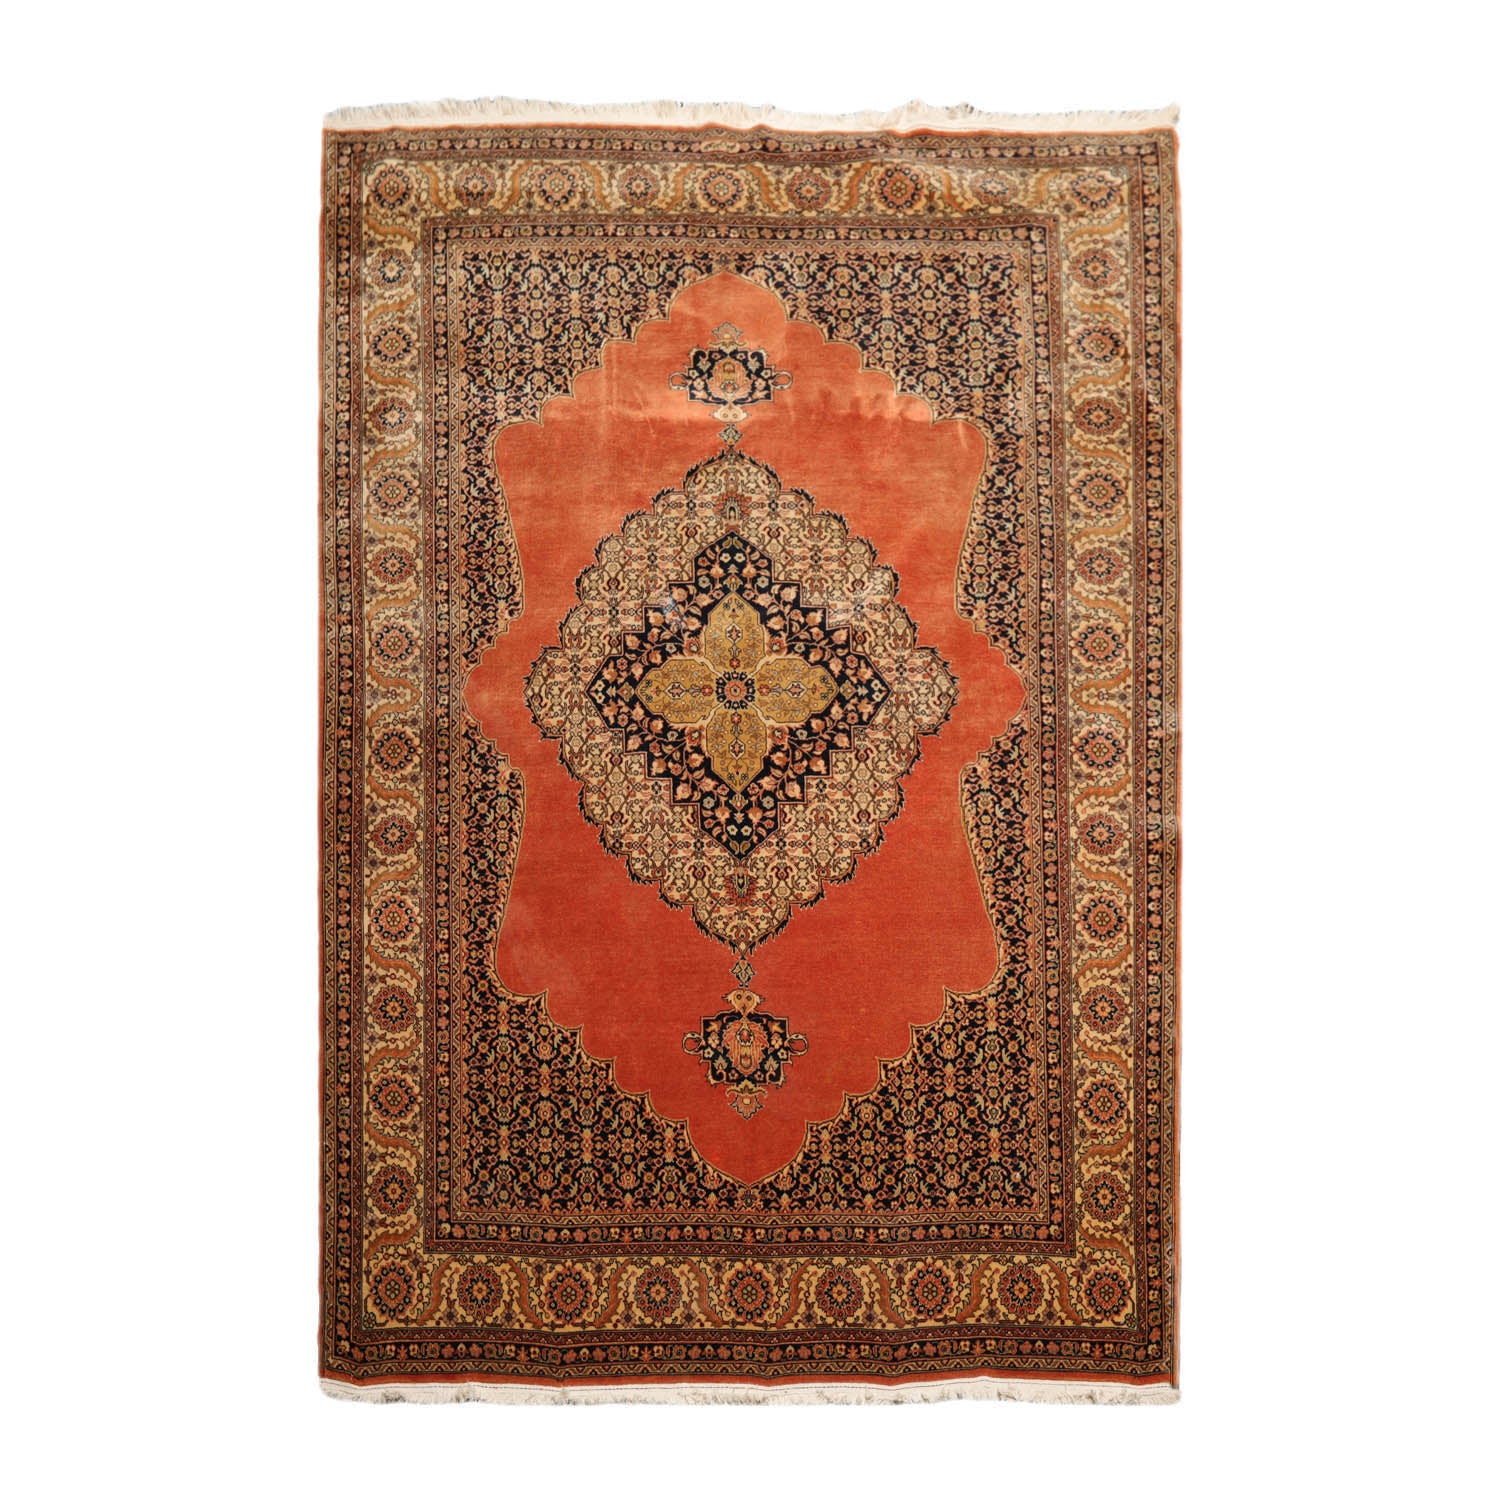 Aissatou 6x9 Hand Knotted 100% Wool Traditional Oriental Area Rug Antique Rose, Beige Color